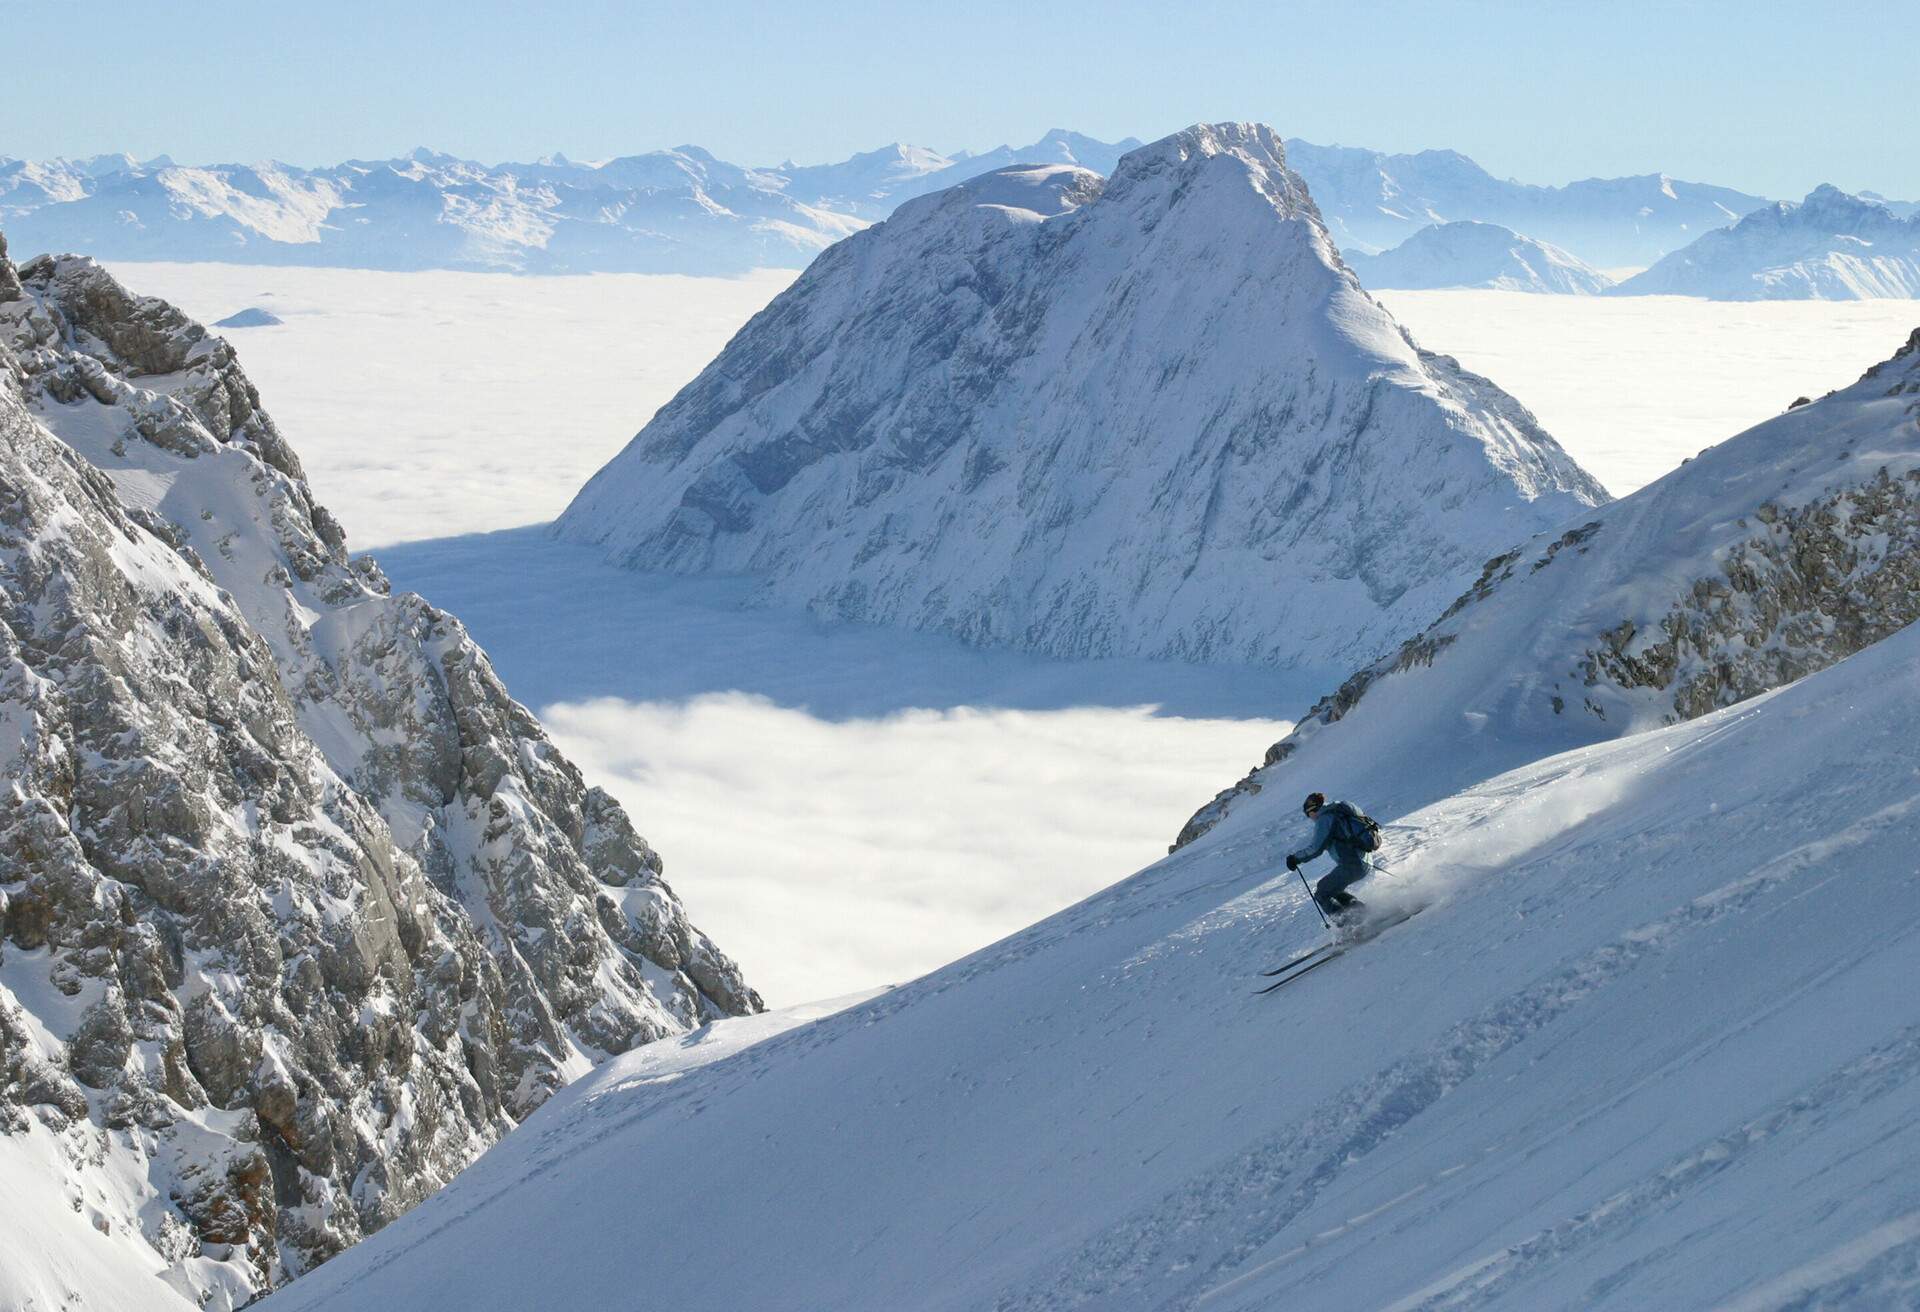 A skier descending a steep snow slope with views of rocky mountains covered in thick fog.